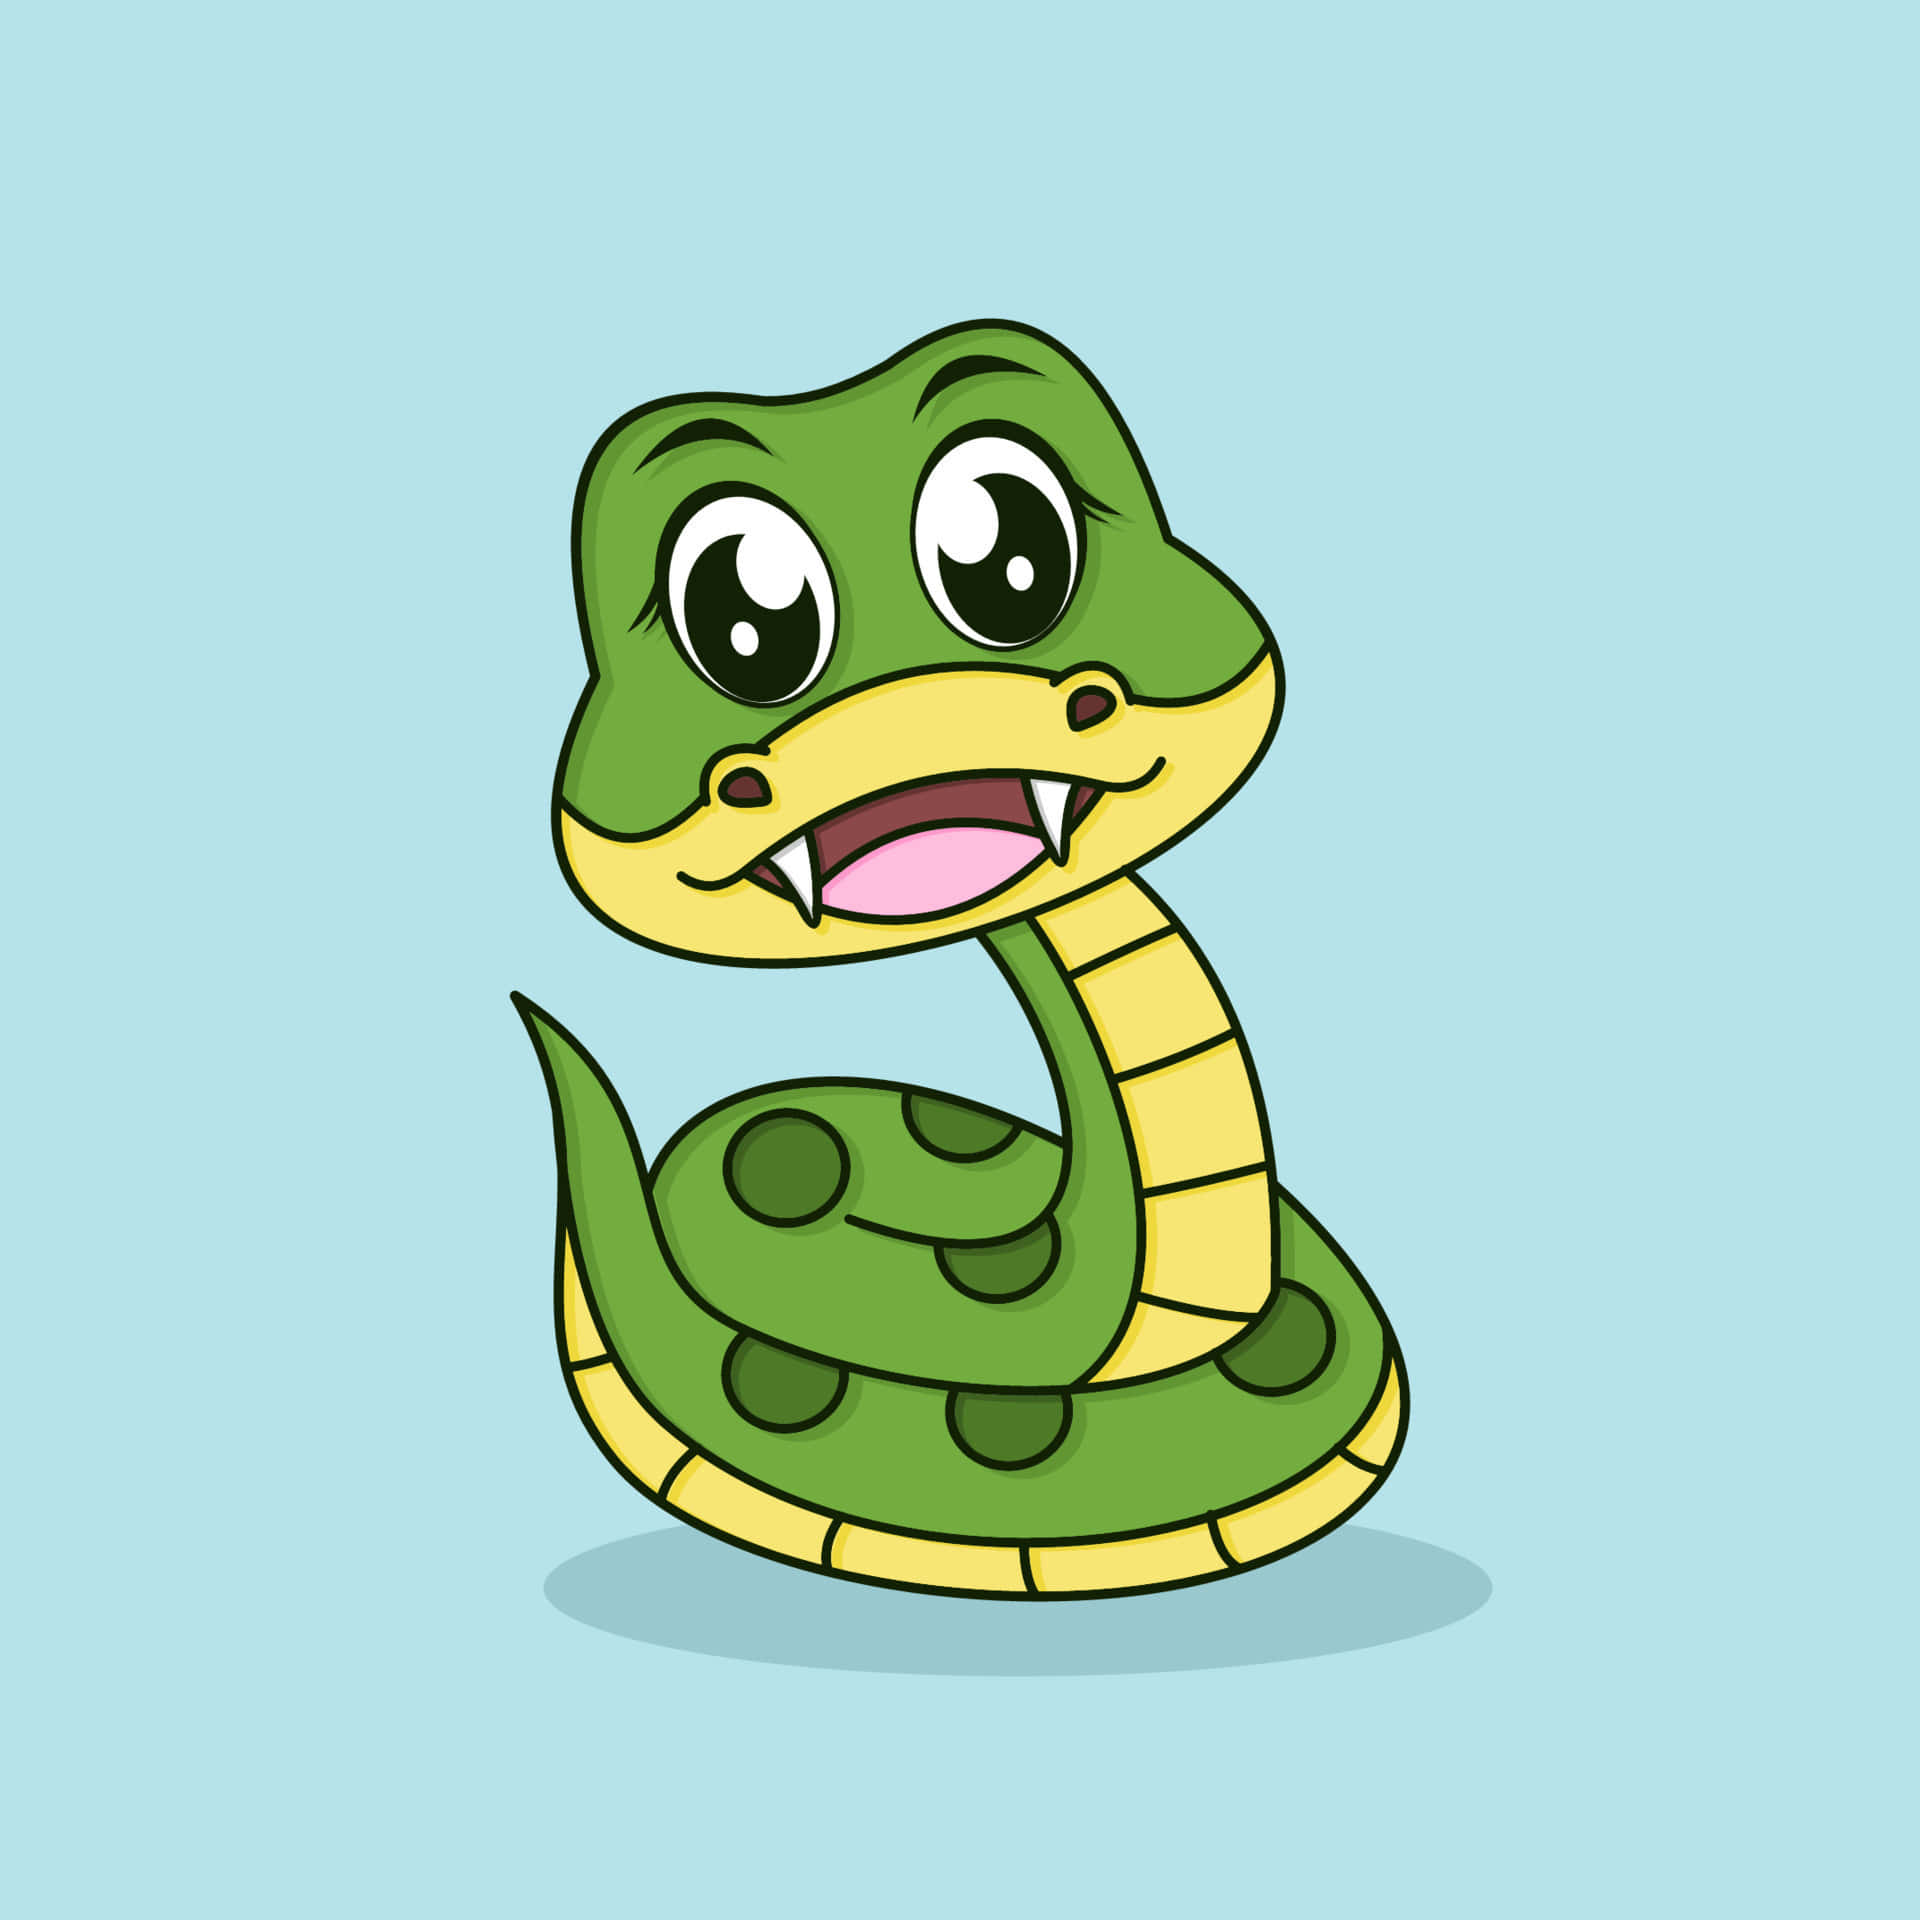 Adorable Serpent Displaying its Innocent Side